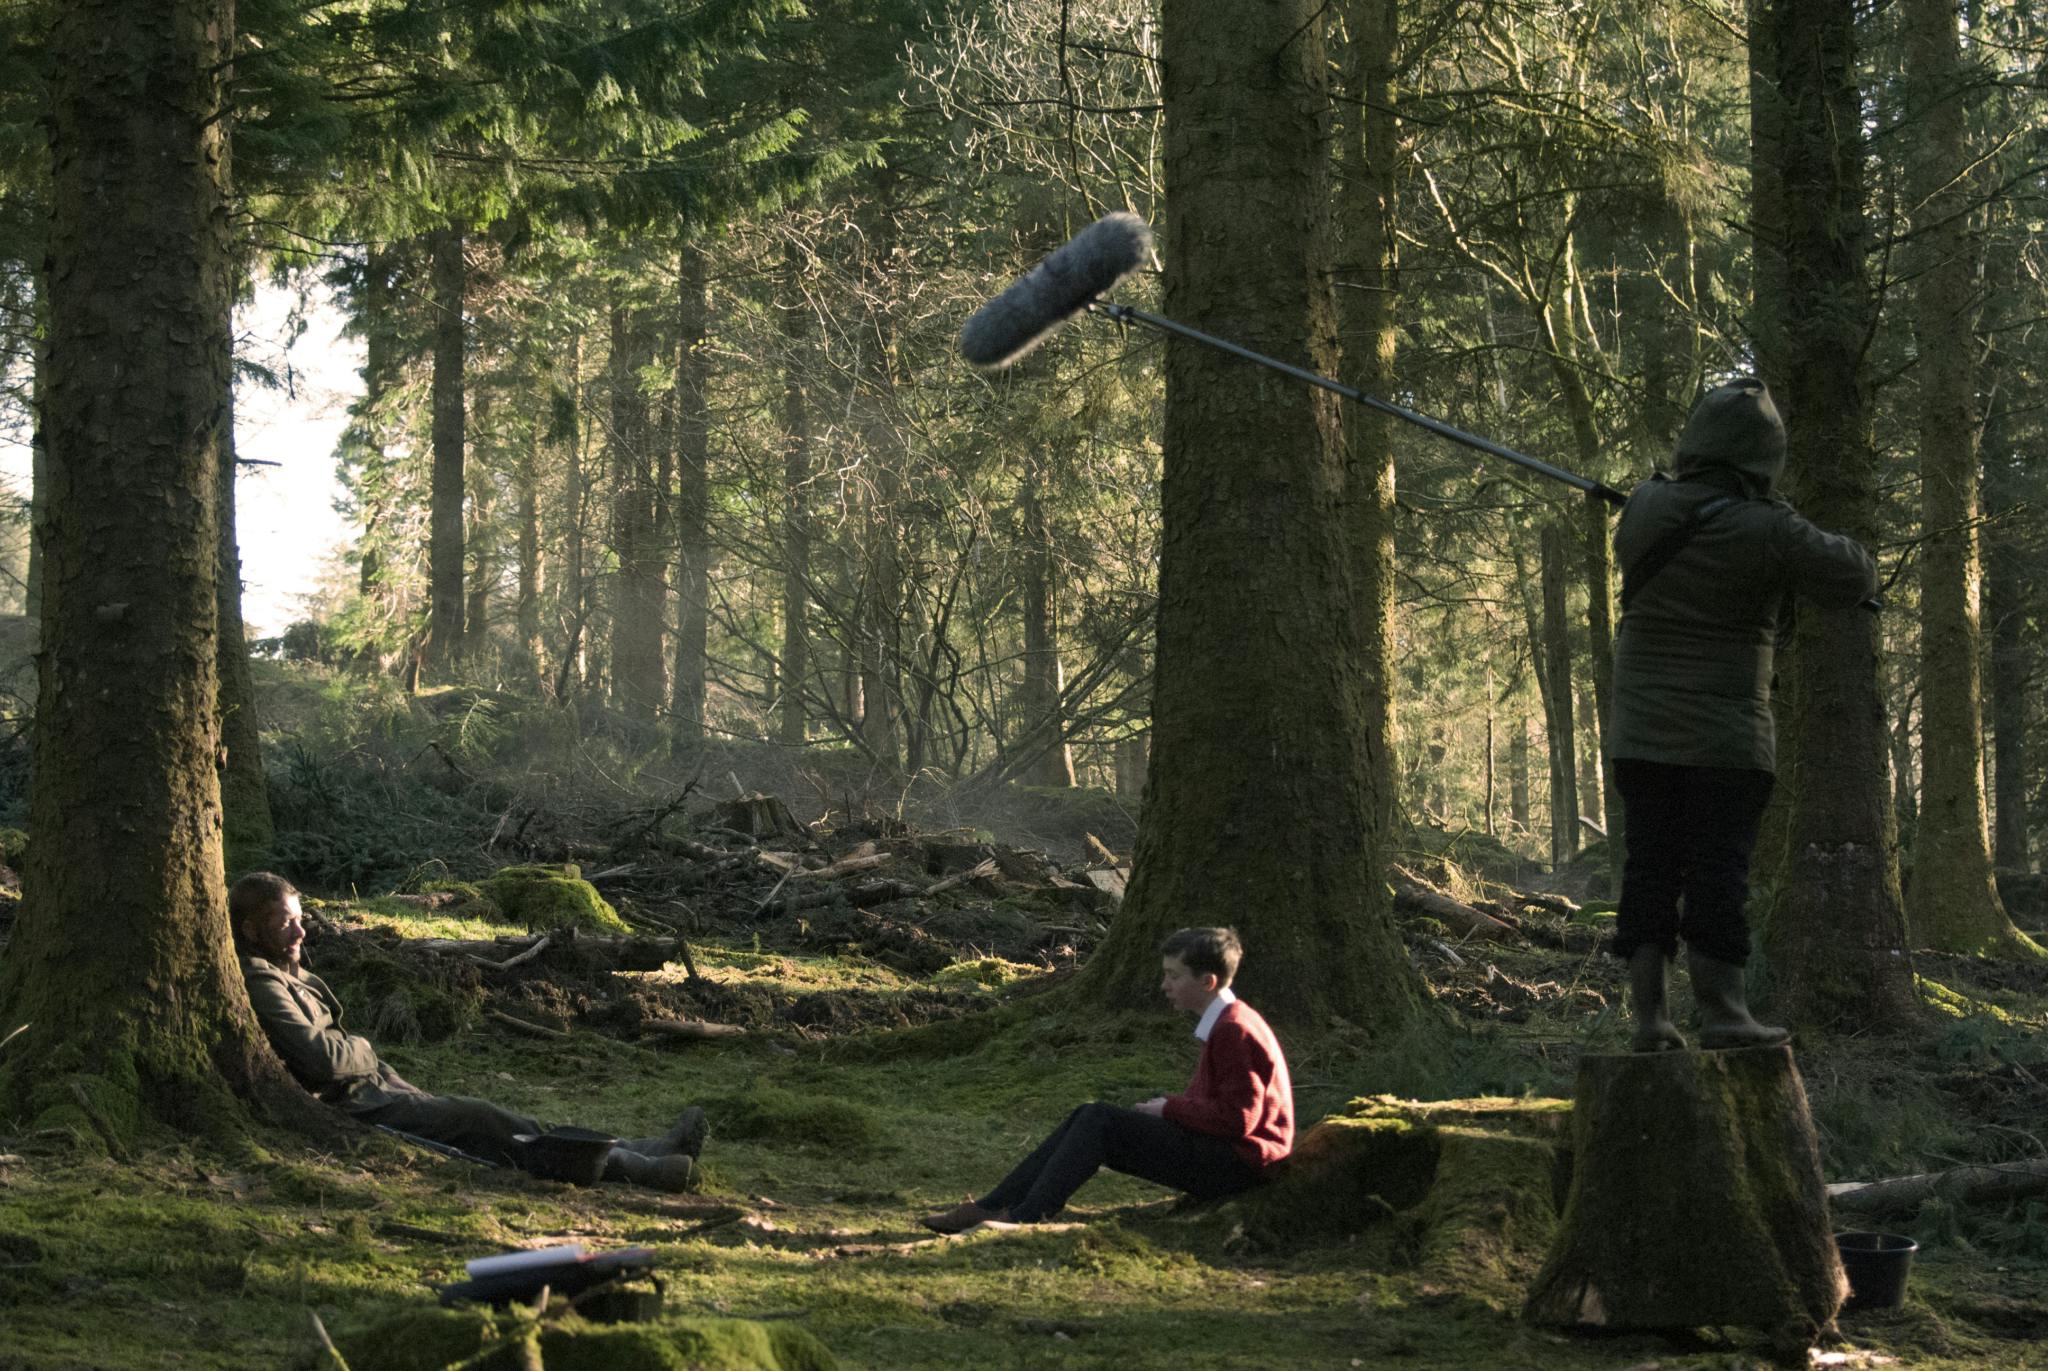 A film crew capture a scene with a young boy leaning against a wooden stump on the forest floor, facing a wounded man. Light filters through the tree leaves and a student holding a sound mic dips into shot.